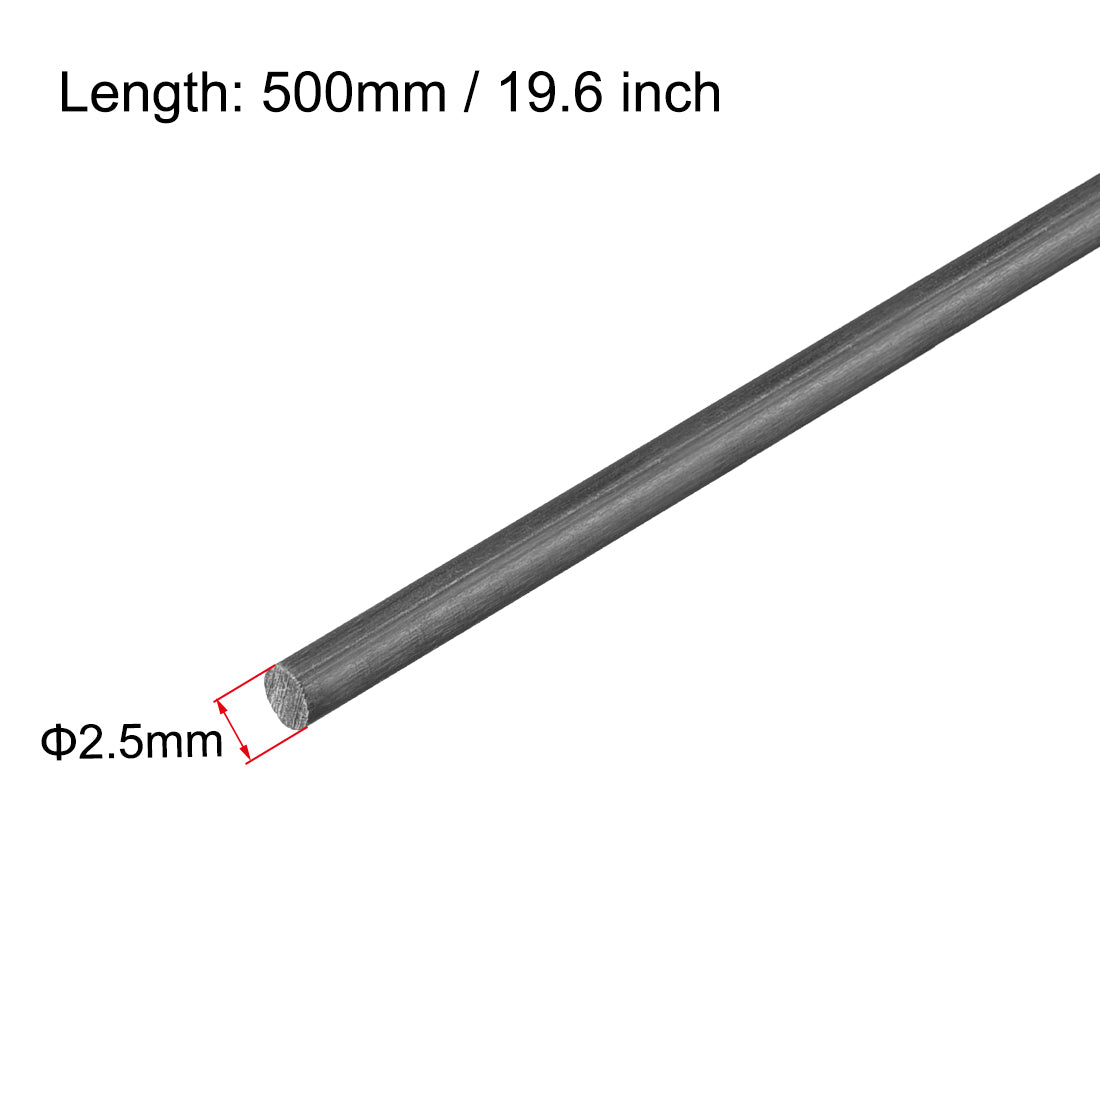 Uxcell Uxcell Carbon Fiber Rod 5mm, 500mm/19.6inch Length for RC Airplane Matte Pole, 4pcs